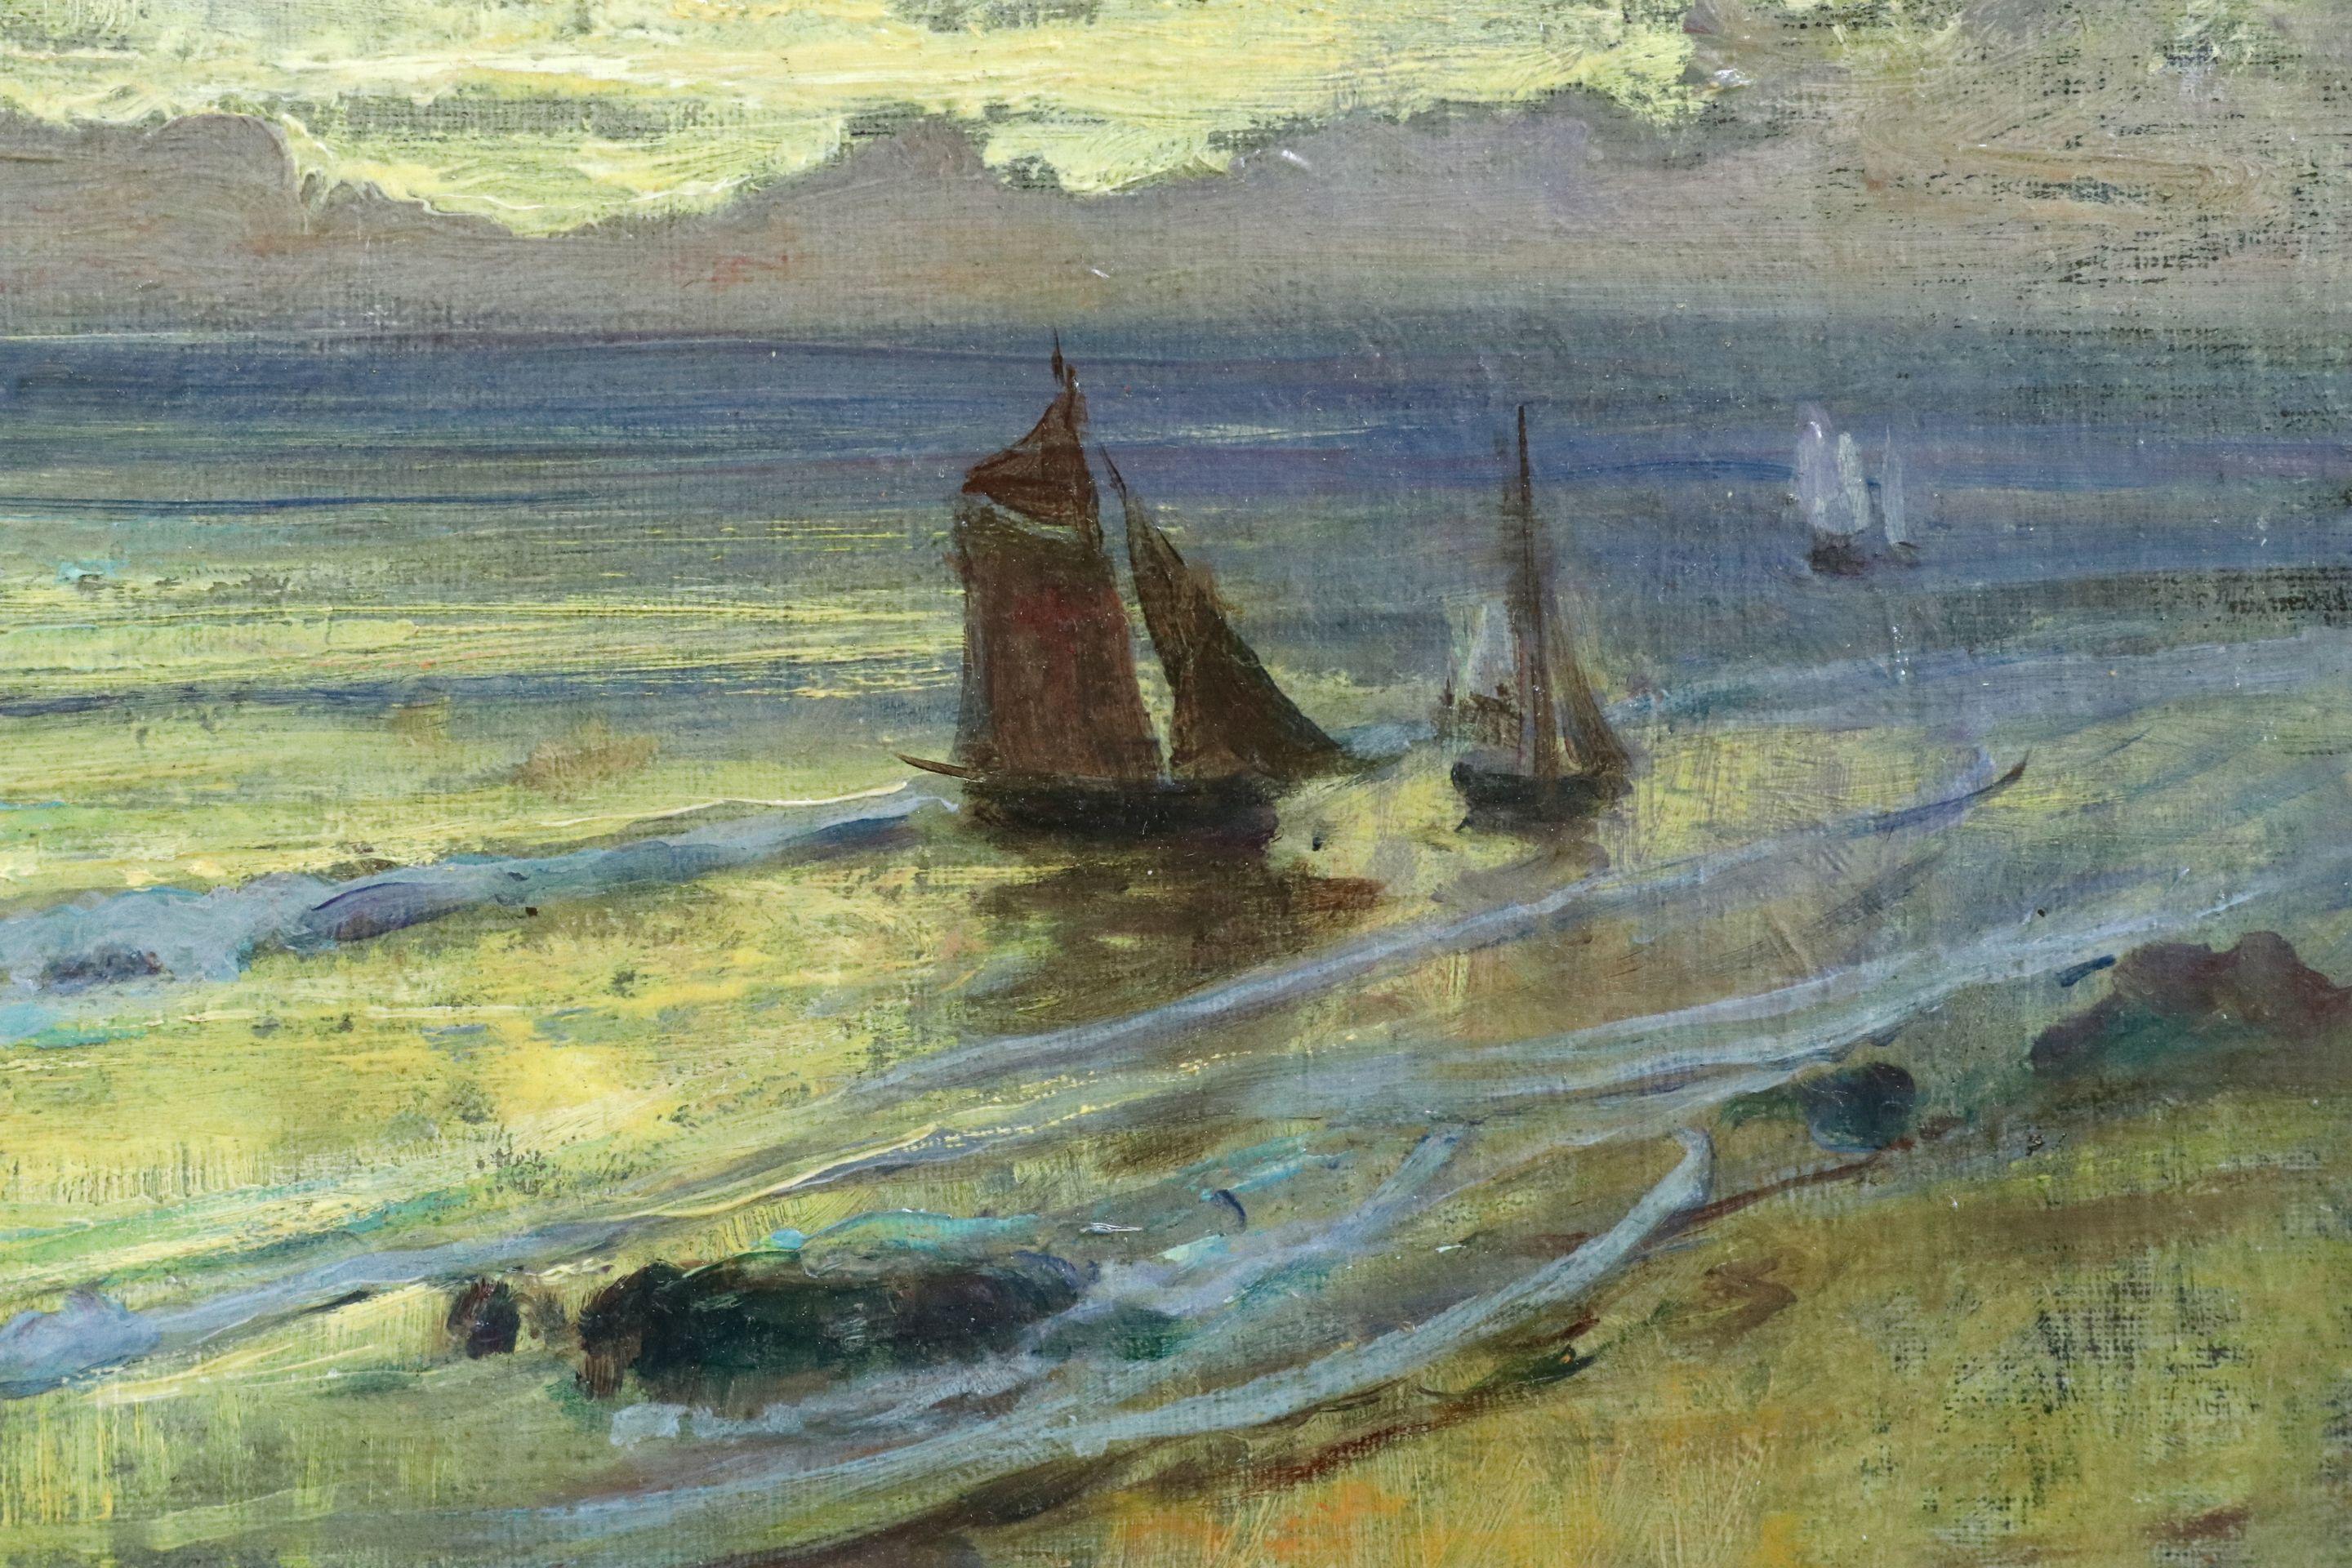 Oil on canvas circa 1910 by Frederick Arthur Bridgman depicting sailing boats at sea at sunset. Signed lower left. Framed dimensions are 12 inches high by 15.5 inches wide.

Frederick Bridgman started out in 1863 as an engraver for the American